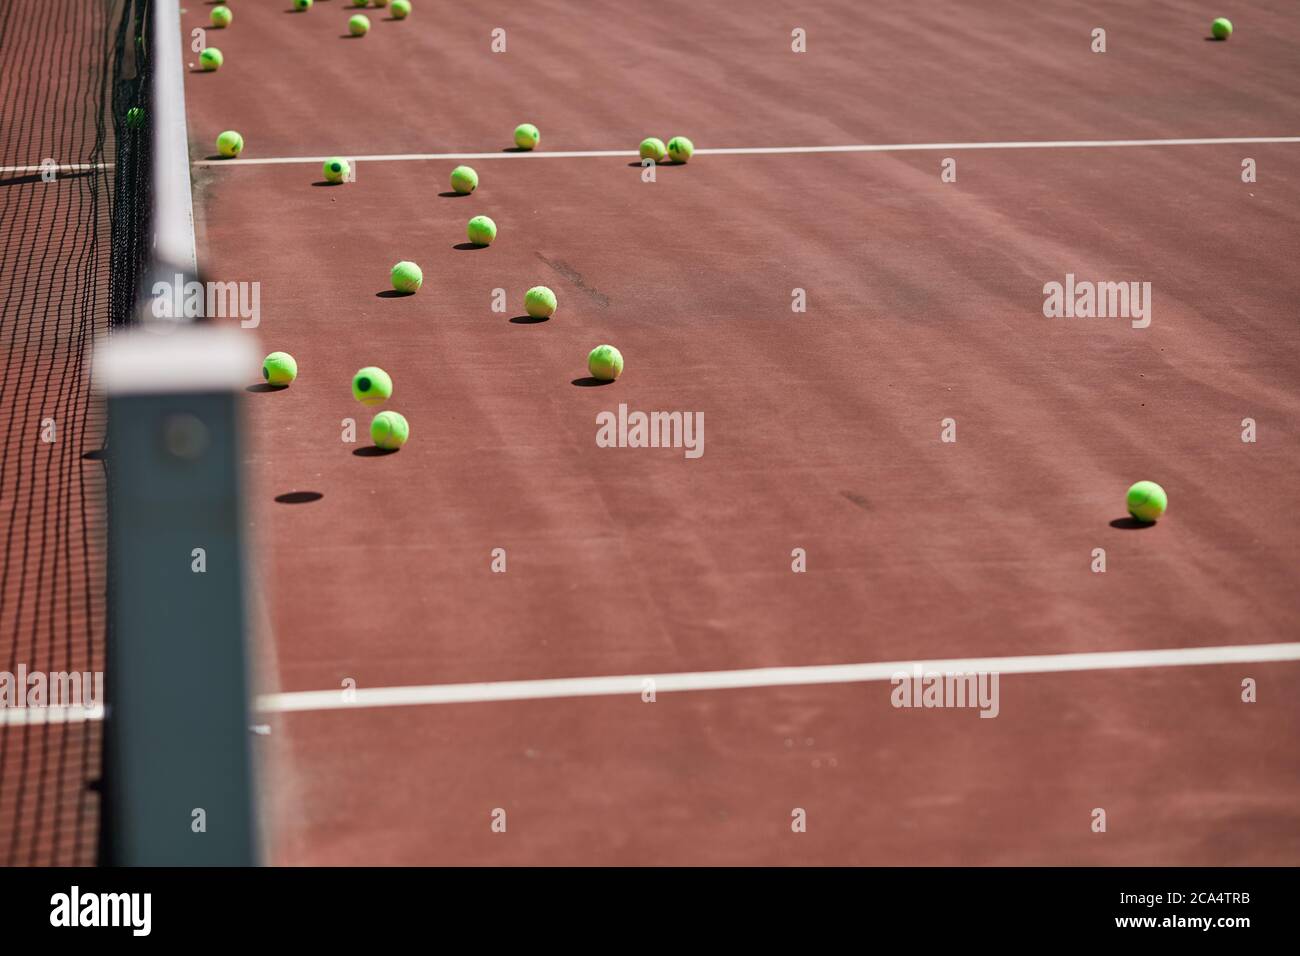 Red-clay tennis court with sport equipment and tennis balls on it. Nobody is on field Stock Photo